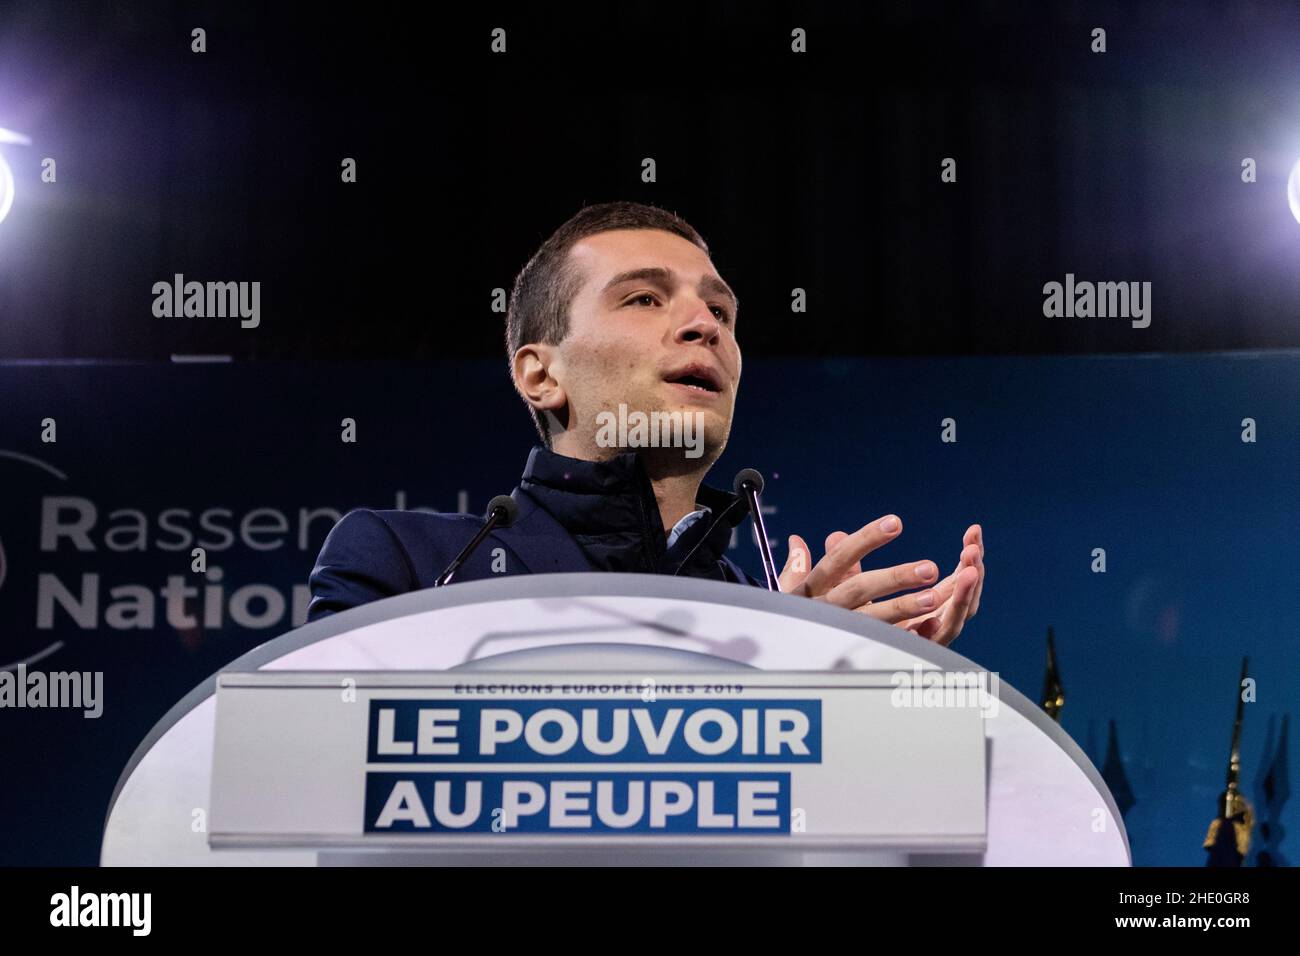 Jordan Bardella is a French politician who has served as a spokesman of the National Rally since September 2017. He was the lead candidate of the National Rally in the 2019 European Parliament election in France. Stock Photo